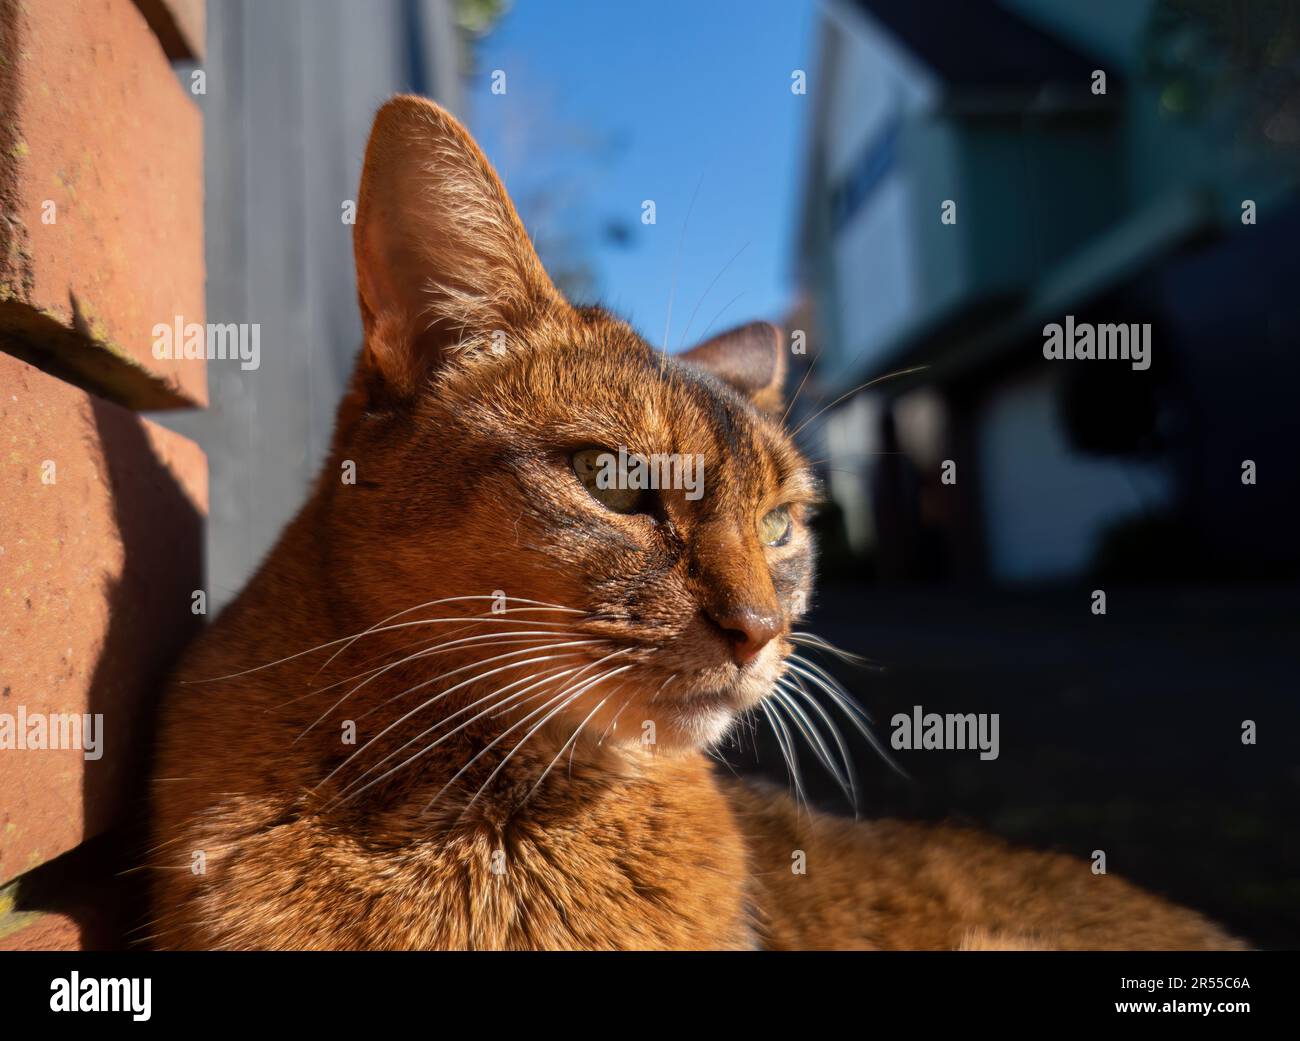 Close-up image of a cat relaxing under the Sun by brick wall at a street corner. Stock Photo